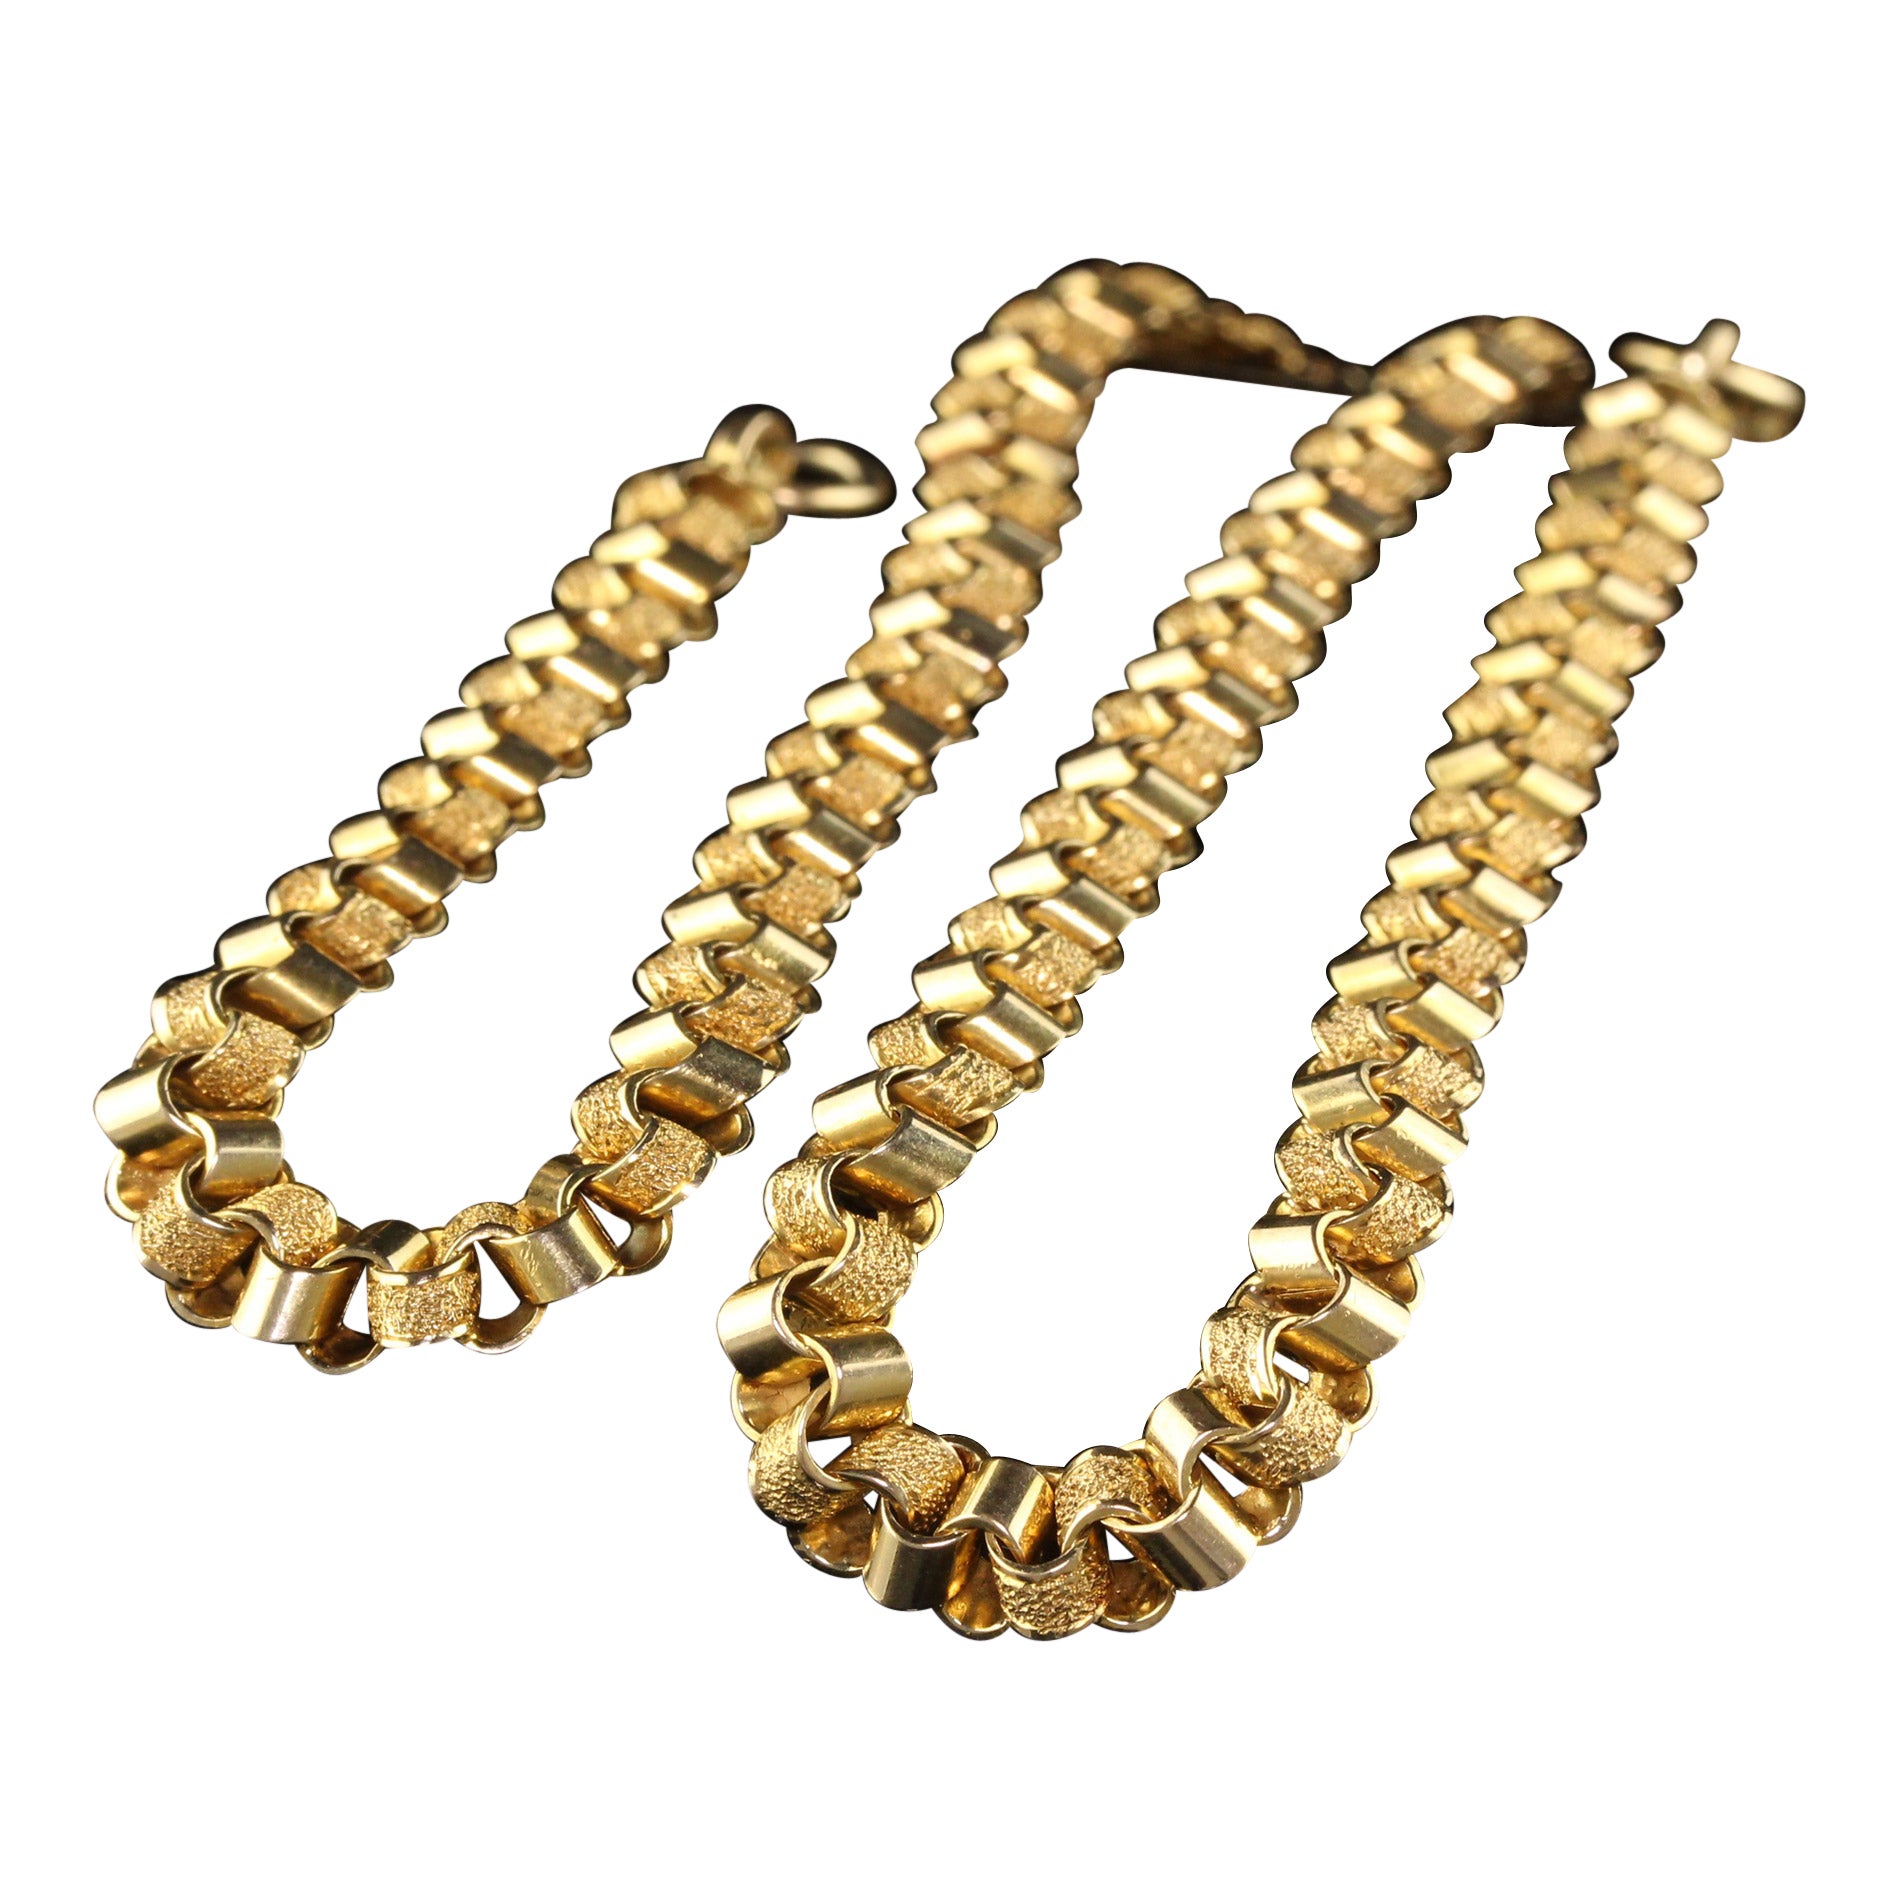 Antique Art Deco 14K Yellow Gold Flat Geometric Link Chain Necklace For Sale